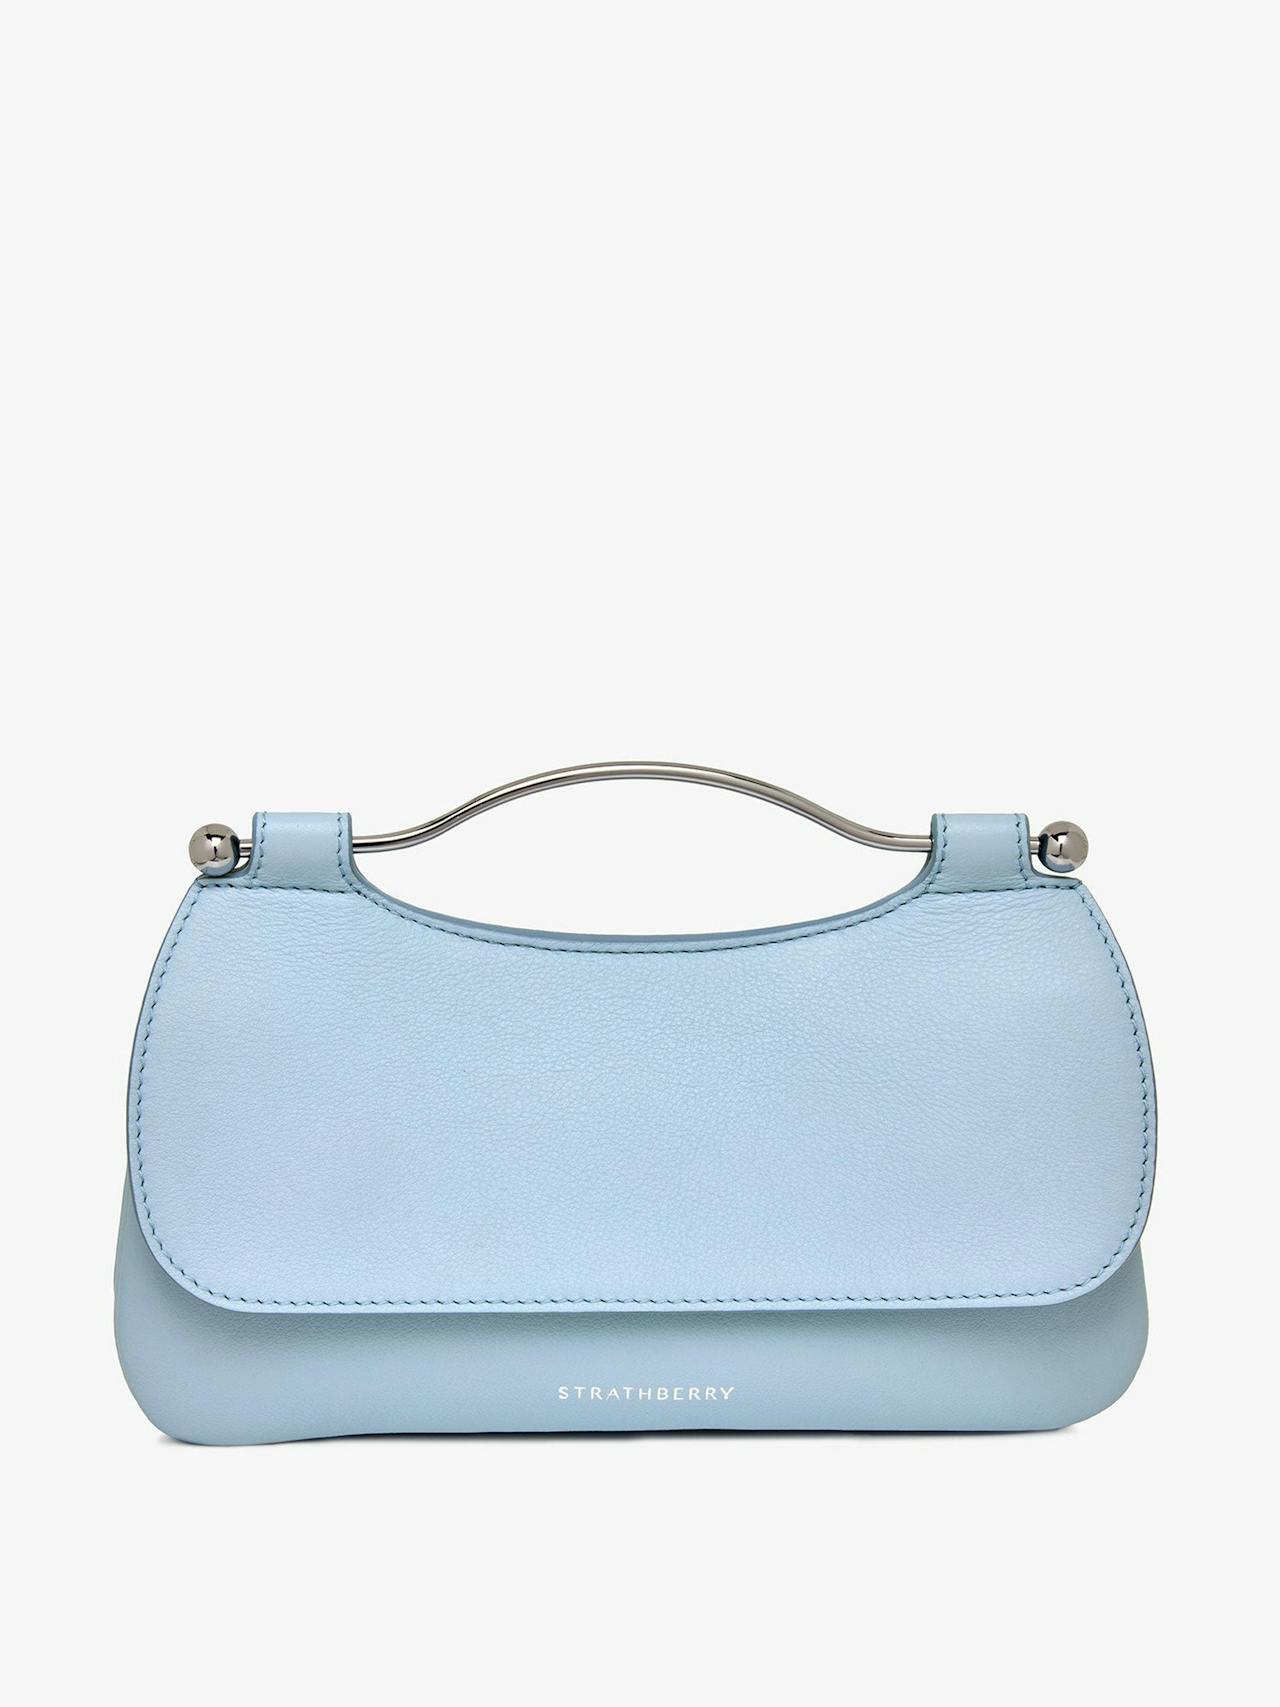 Sky blue with silver hardware Harmony bag